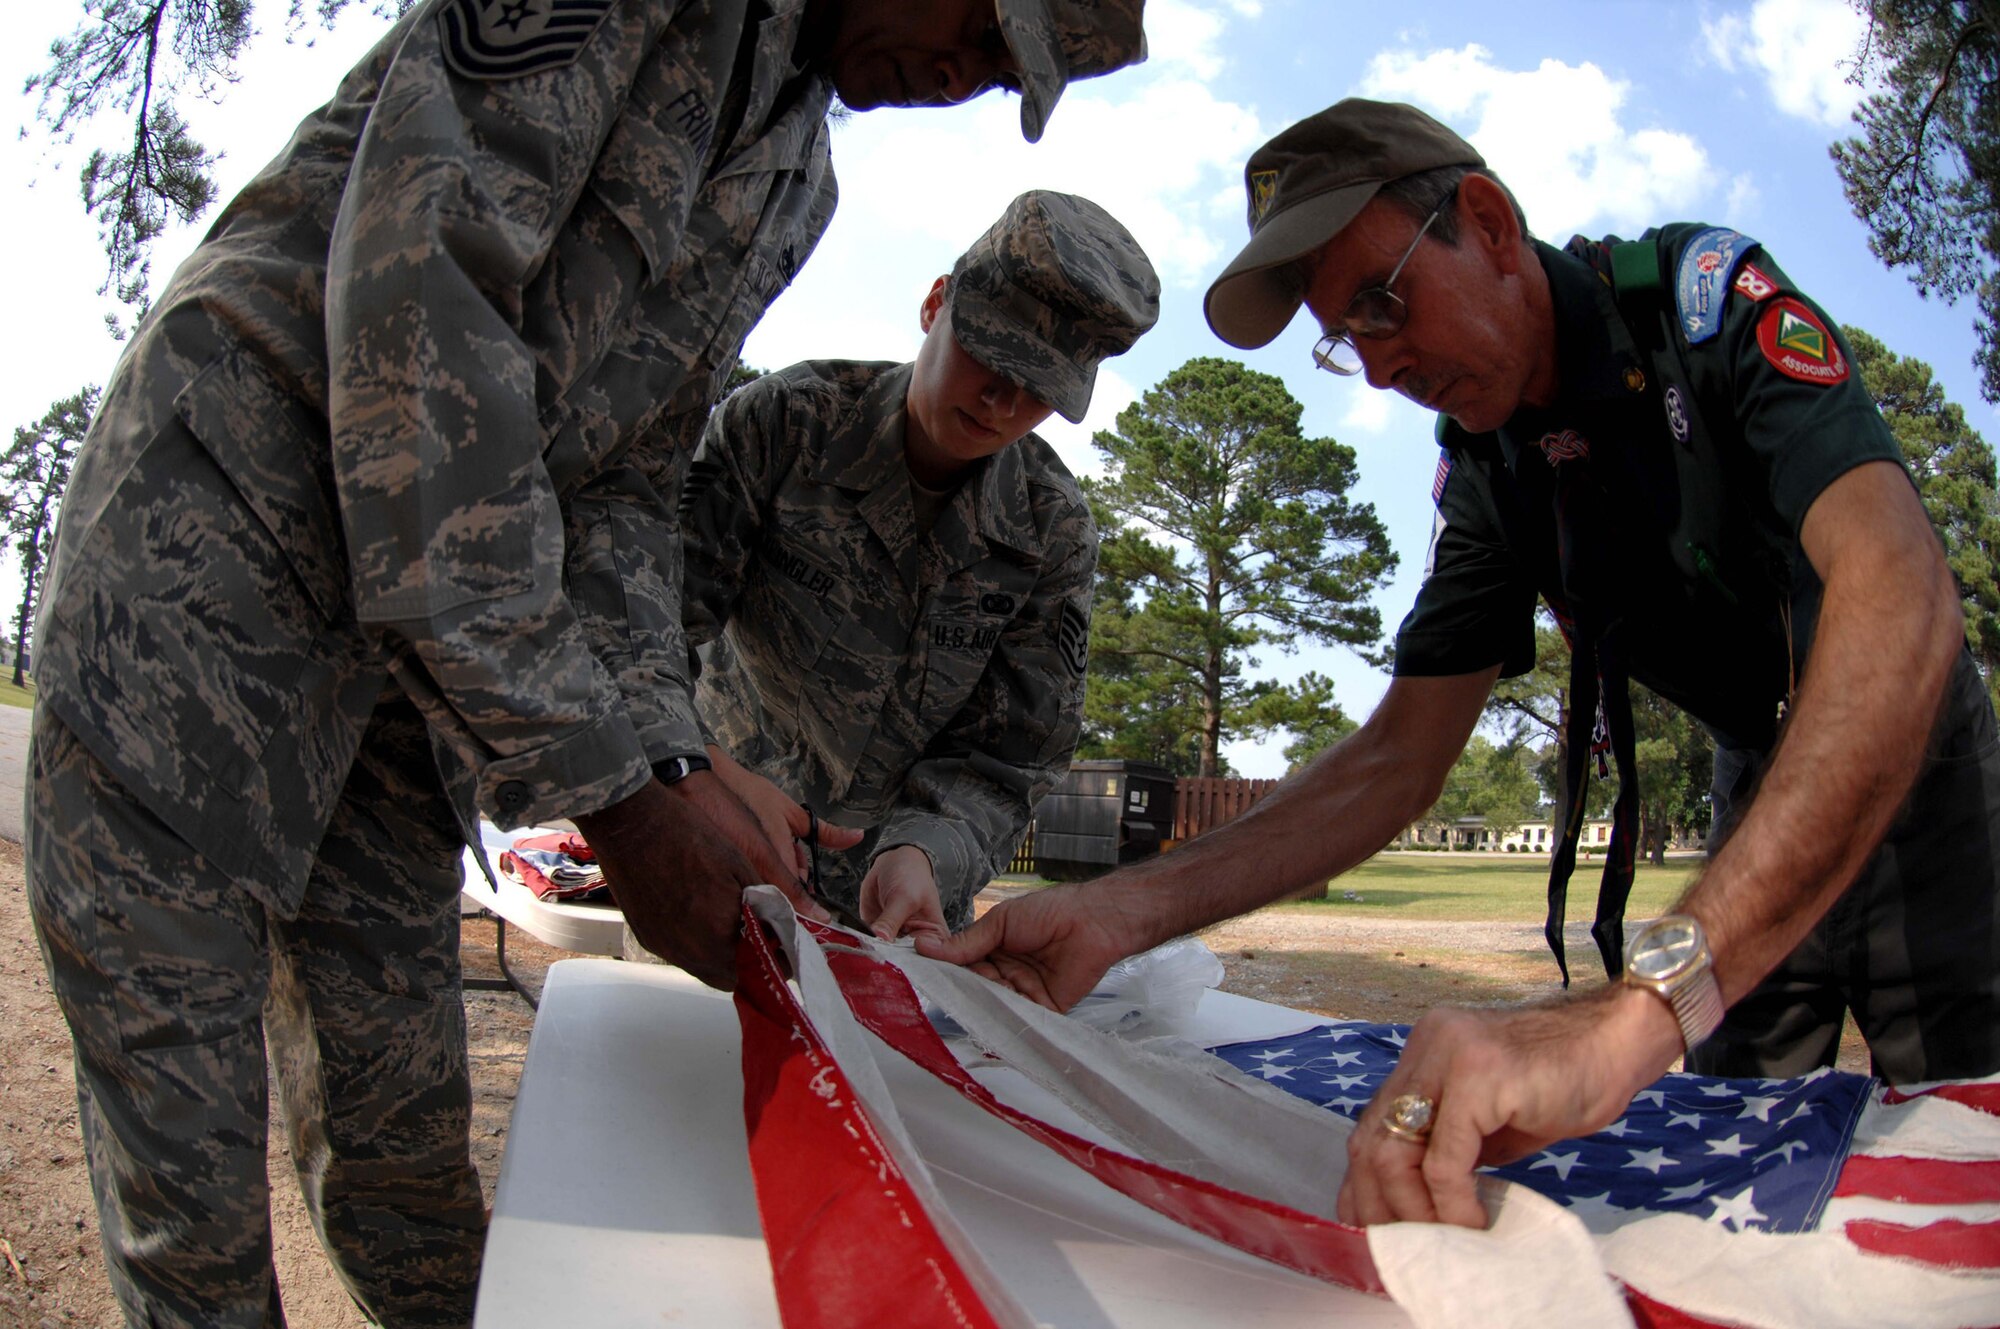 SEYMOUR JOHNSON AIR FORCE BASE, N.C. Command Chief Master Sgt. Leroy Frink, Staff Sgt. Jessica klingler and Troop 8 Leader Dewey Offield cut an American flag for a flag retirement ceremony, June 14 2008. (U.S. Air Force photo by Airman 1st Class Gino Reyes)